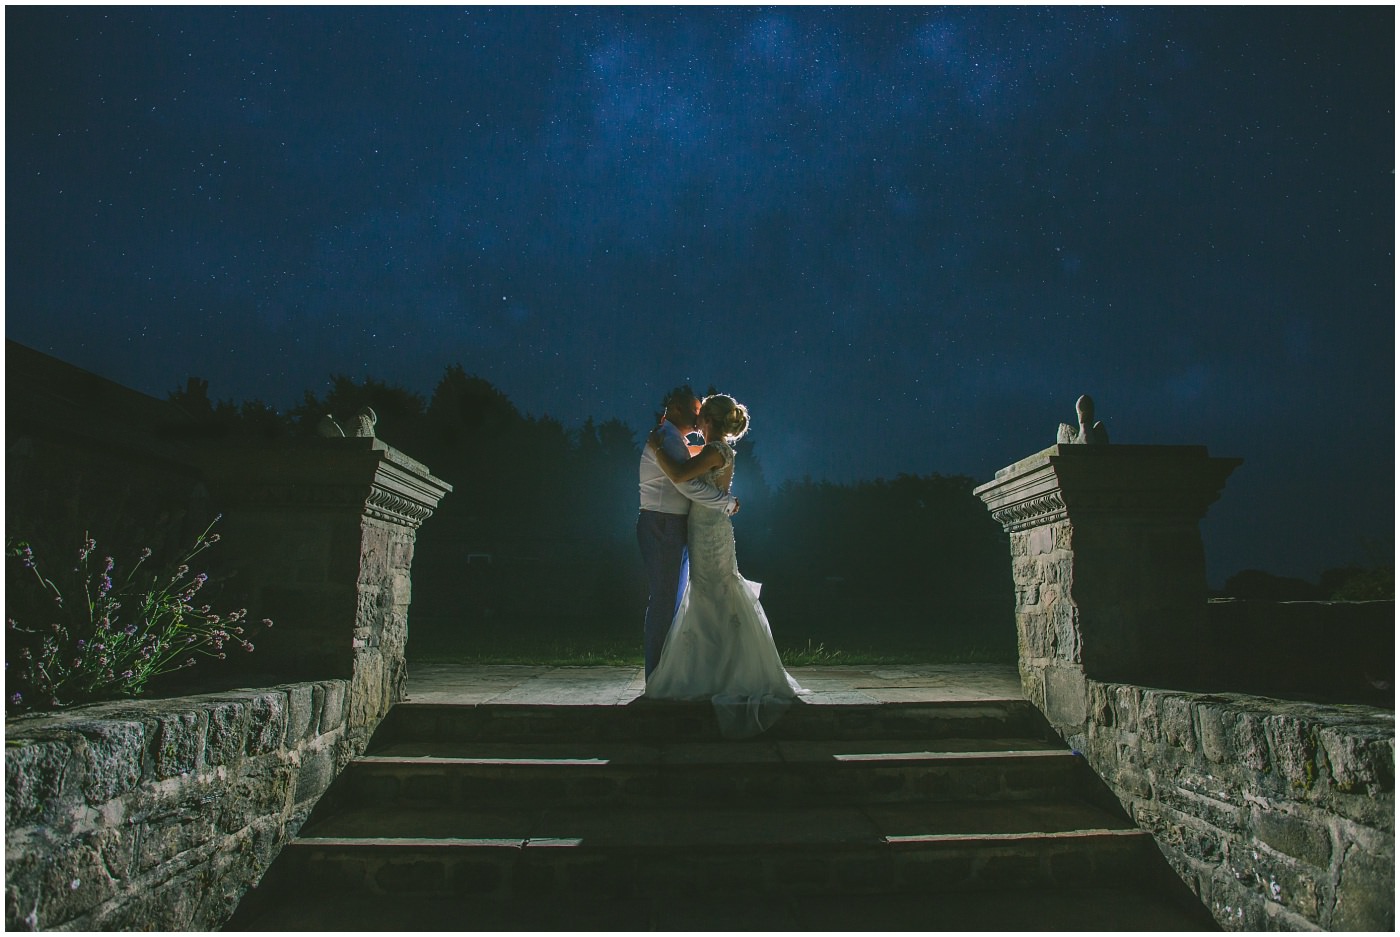 Bride and Groom lit from behind under a stary night sky